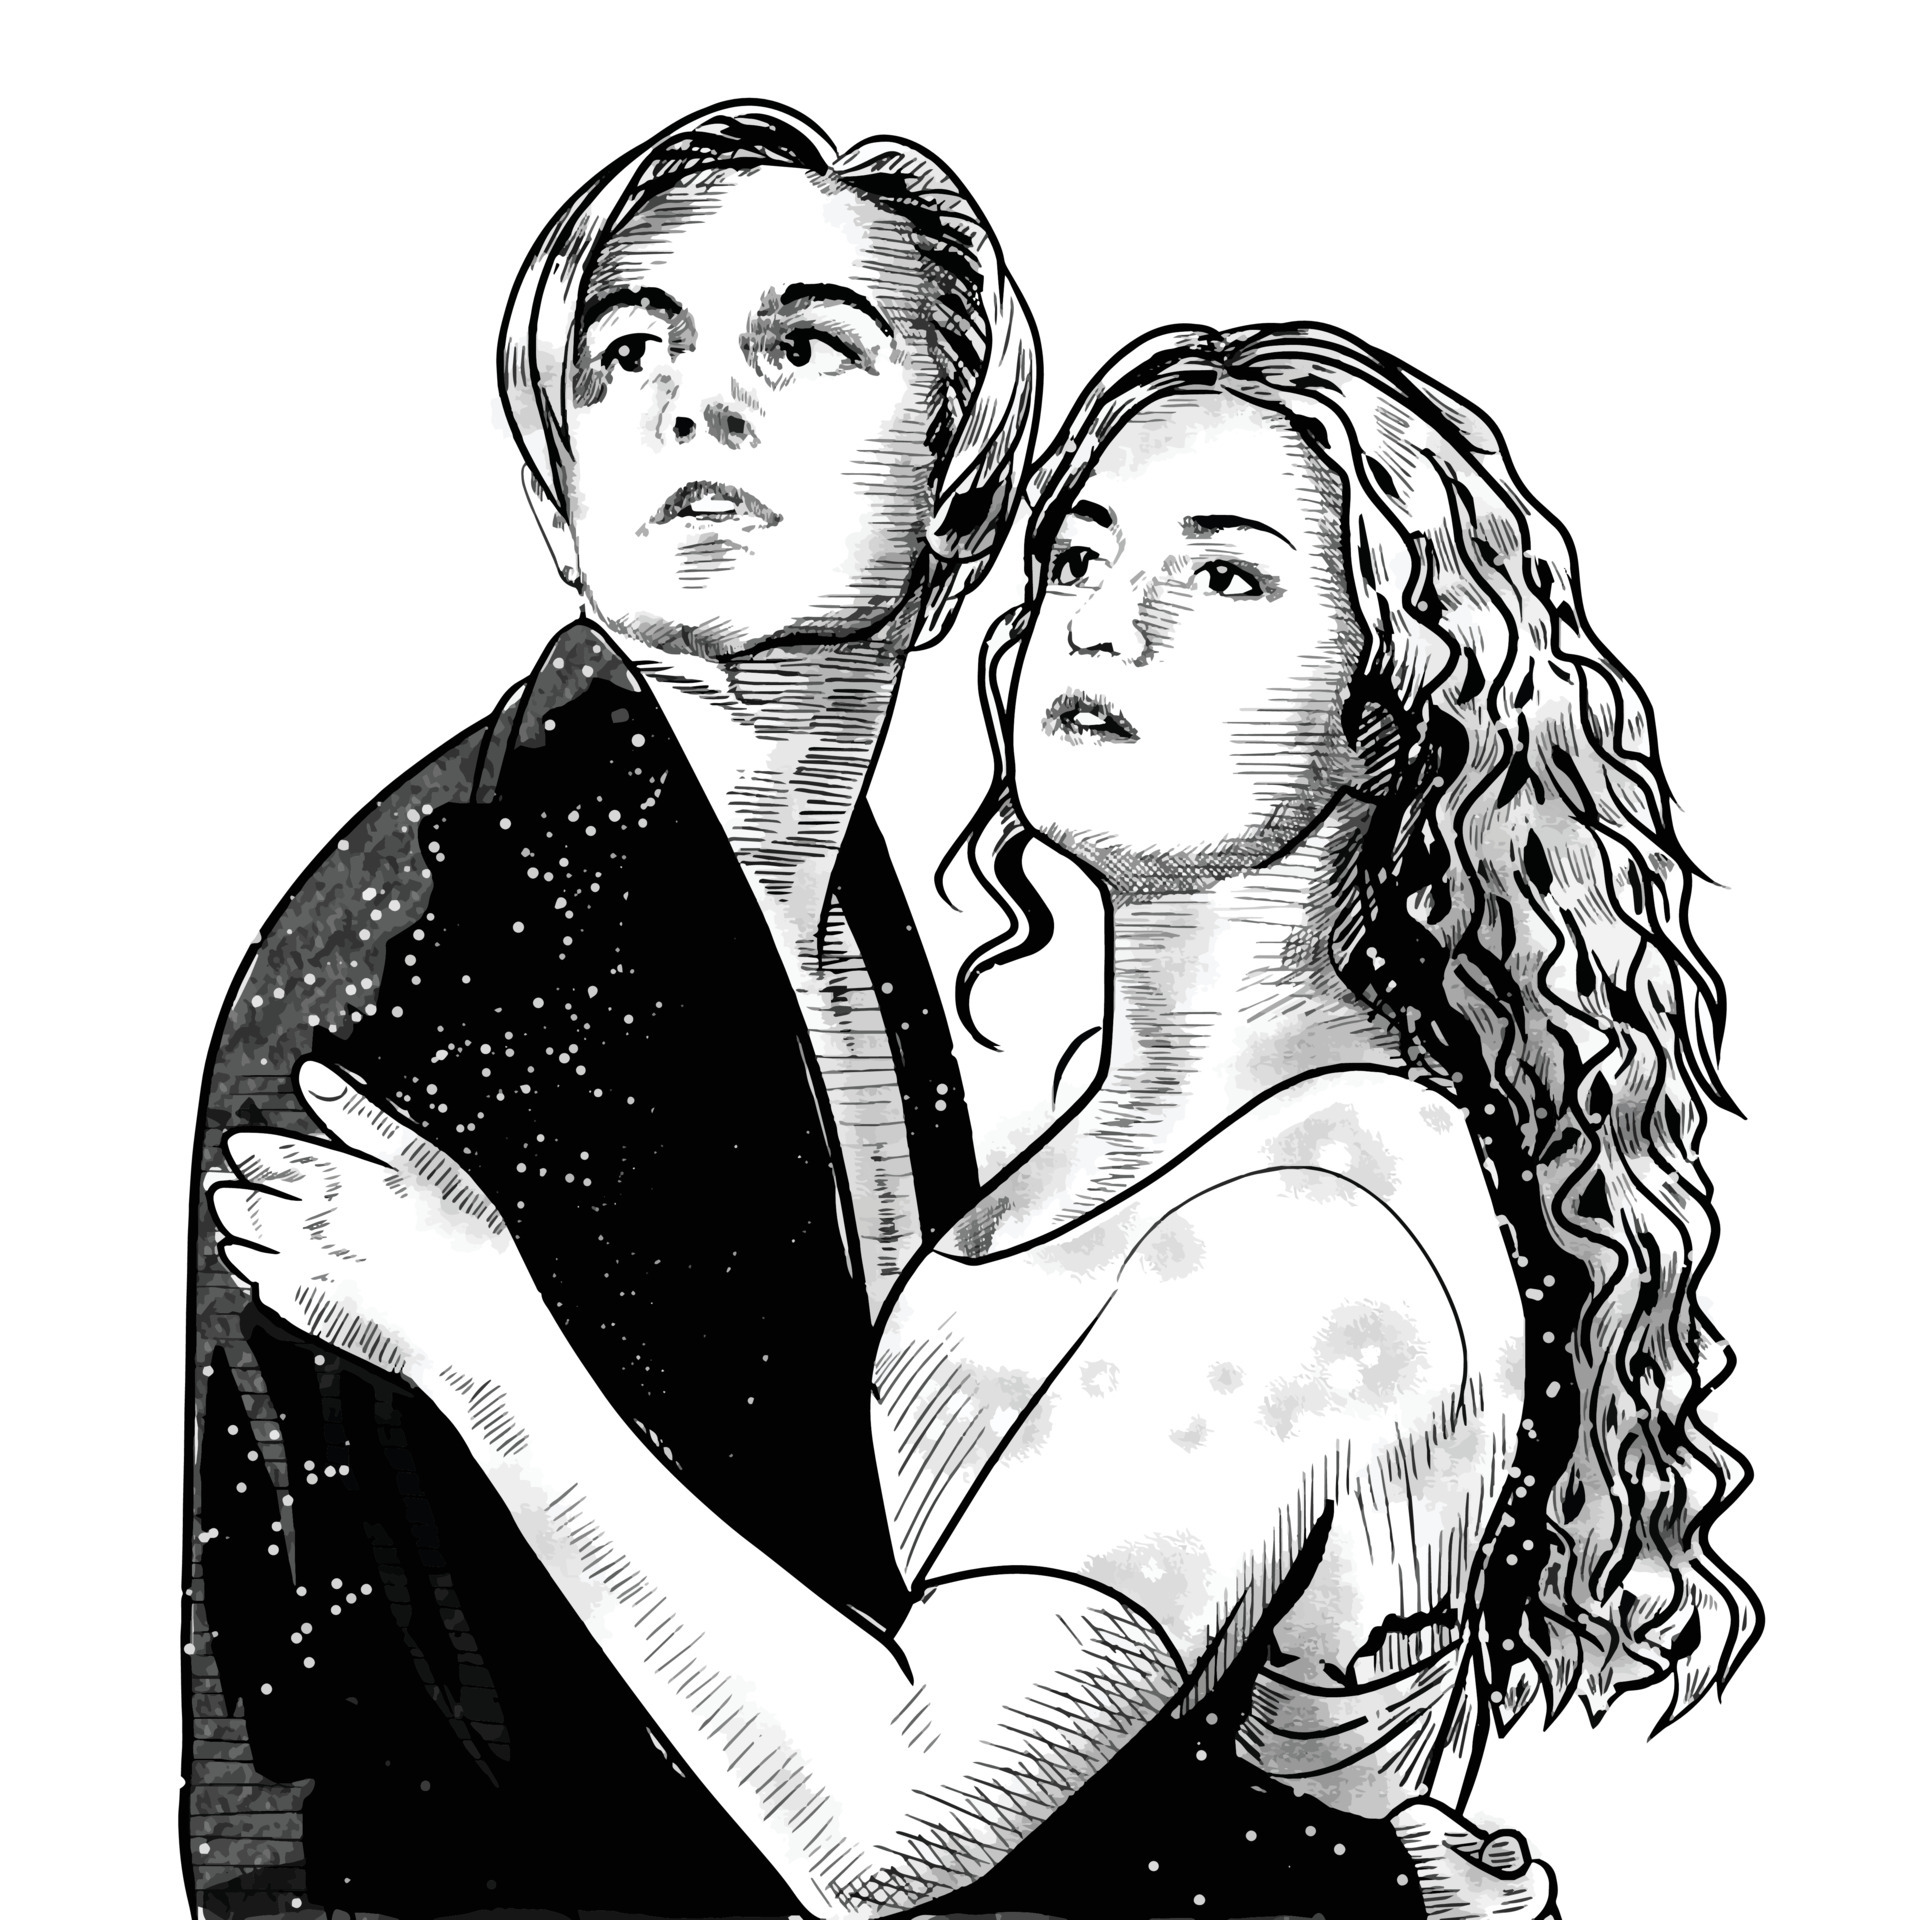 titanic movie coloring pages